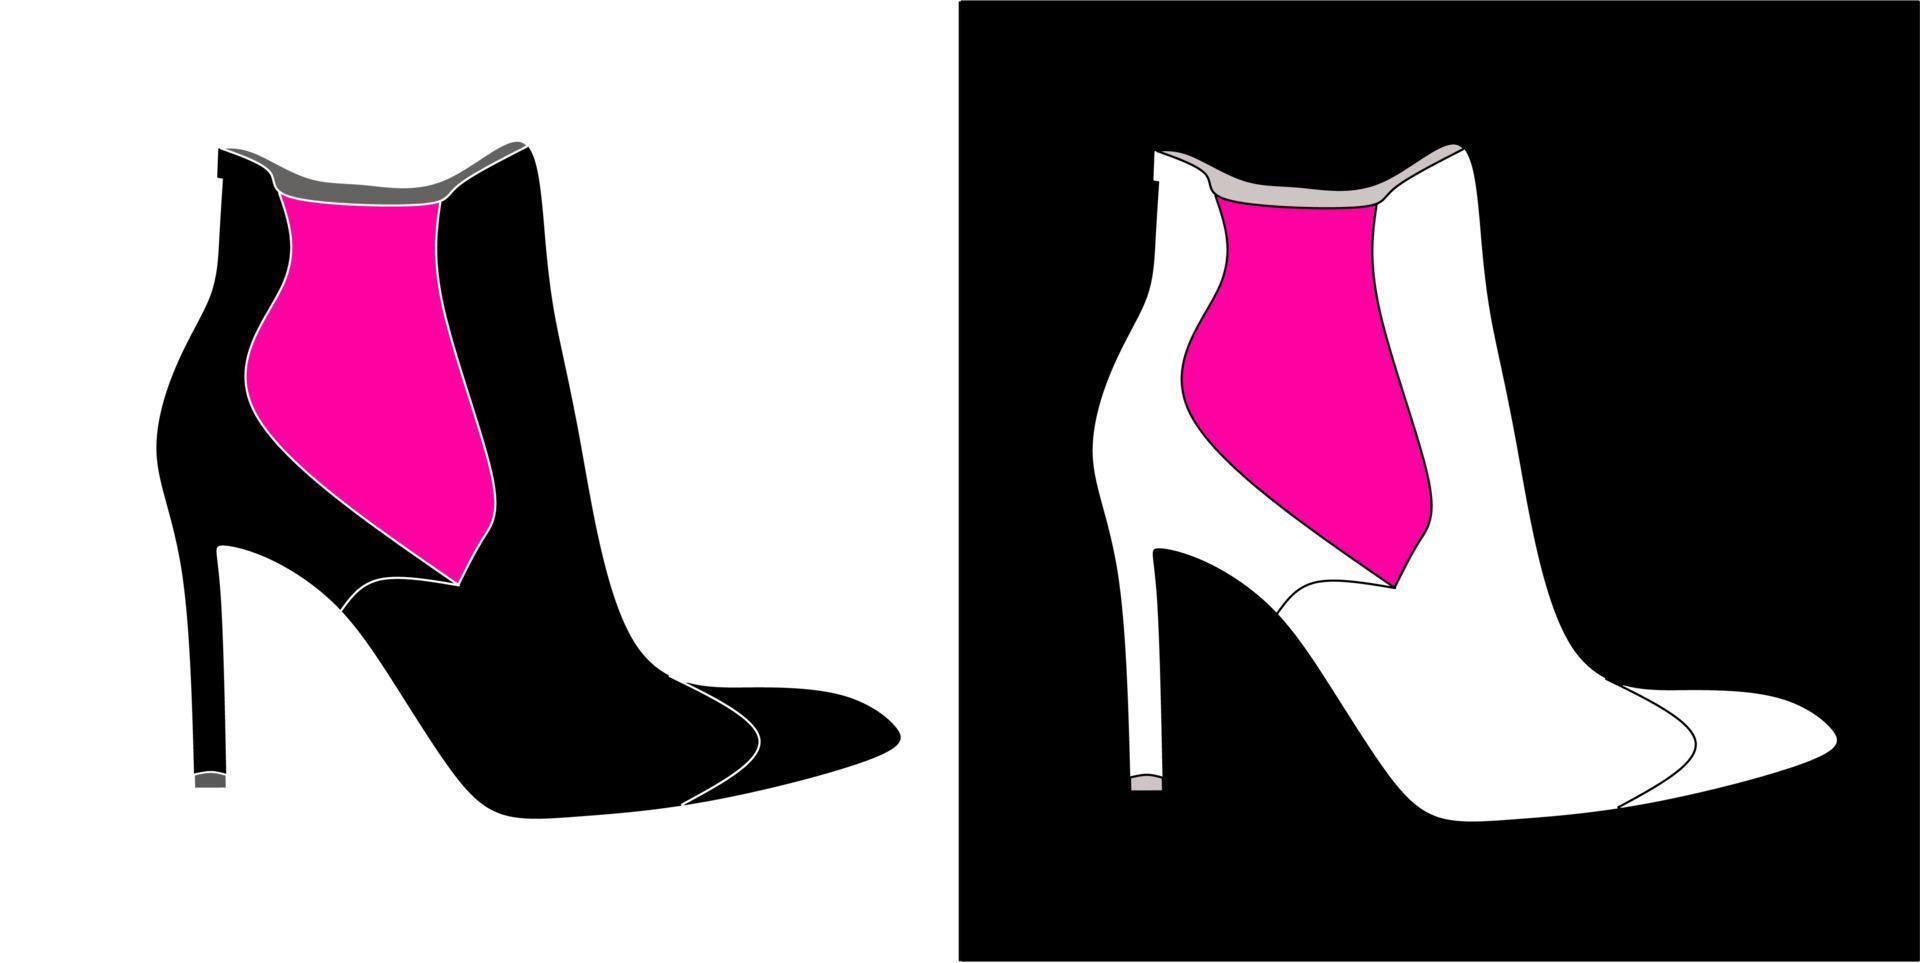 vector illustration of shoes, isolated on black and white background design